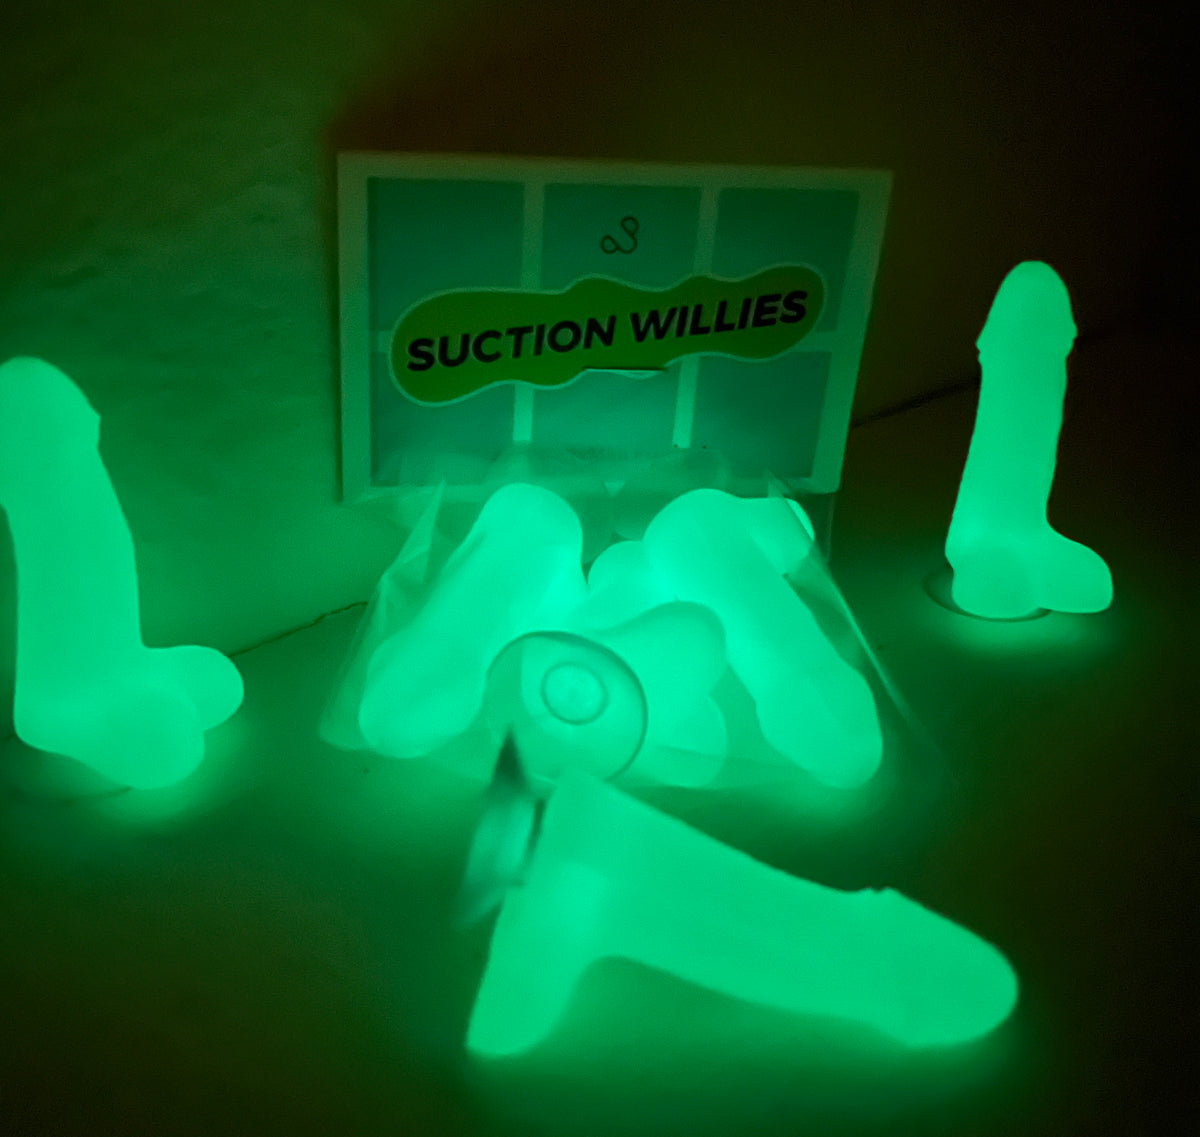 Suction Willies!